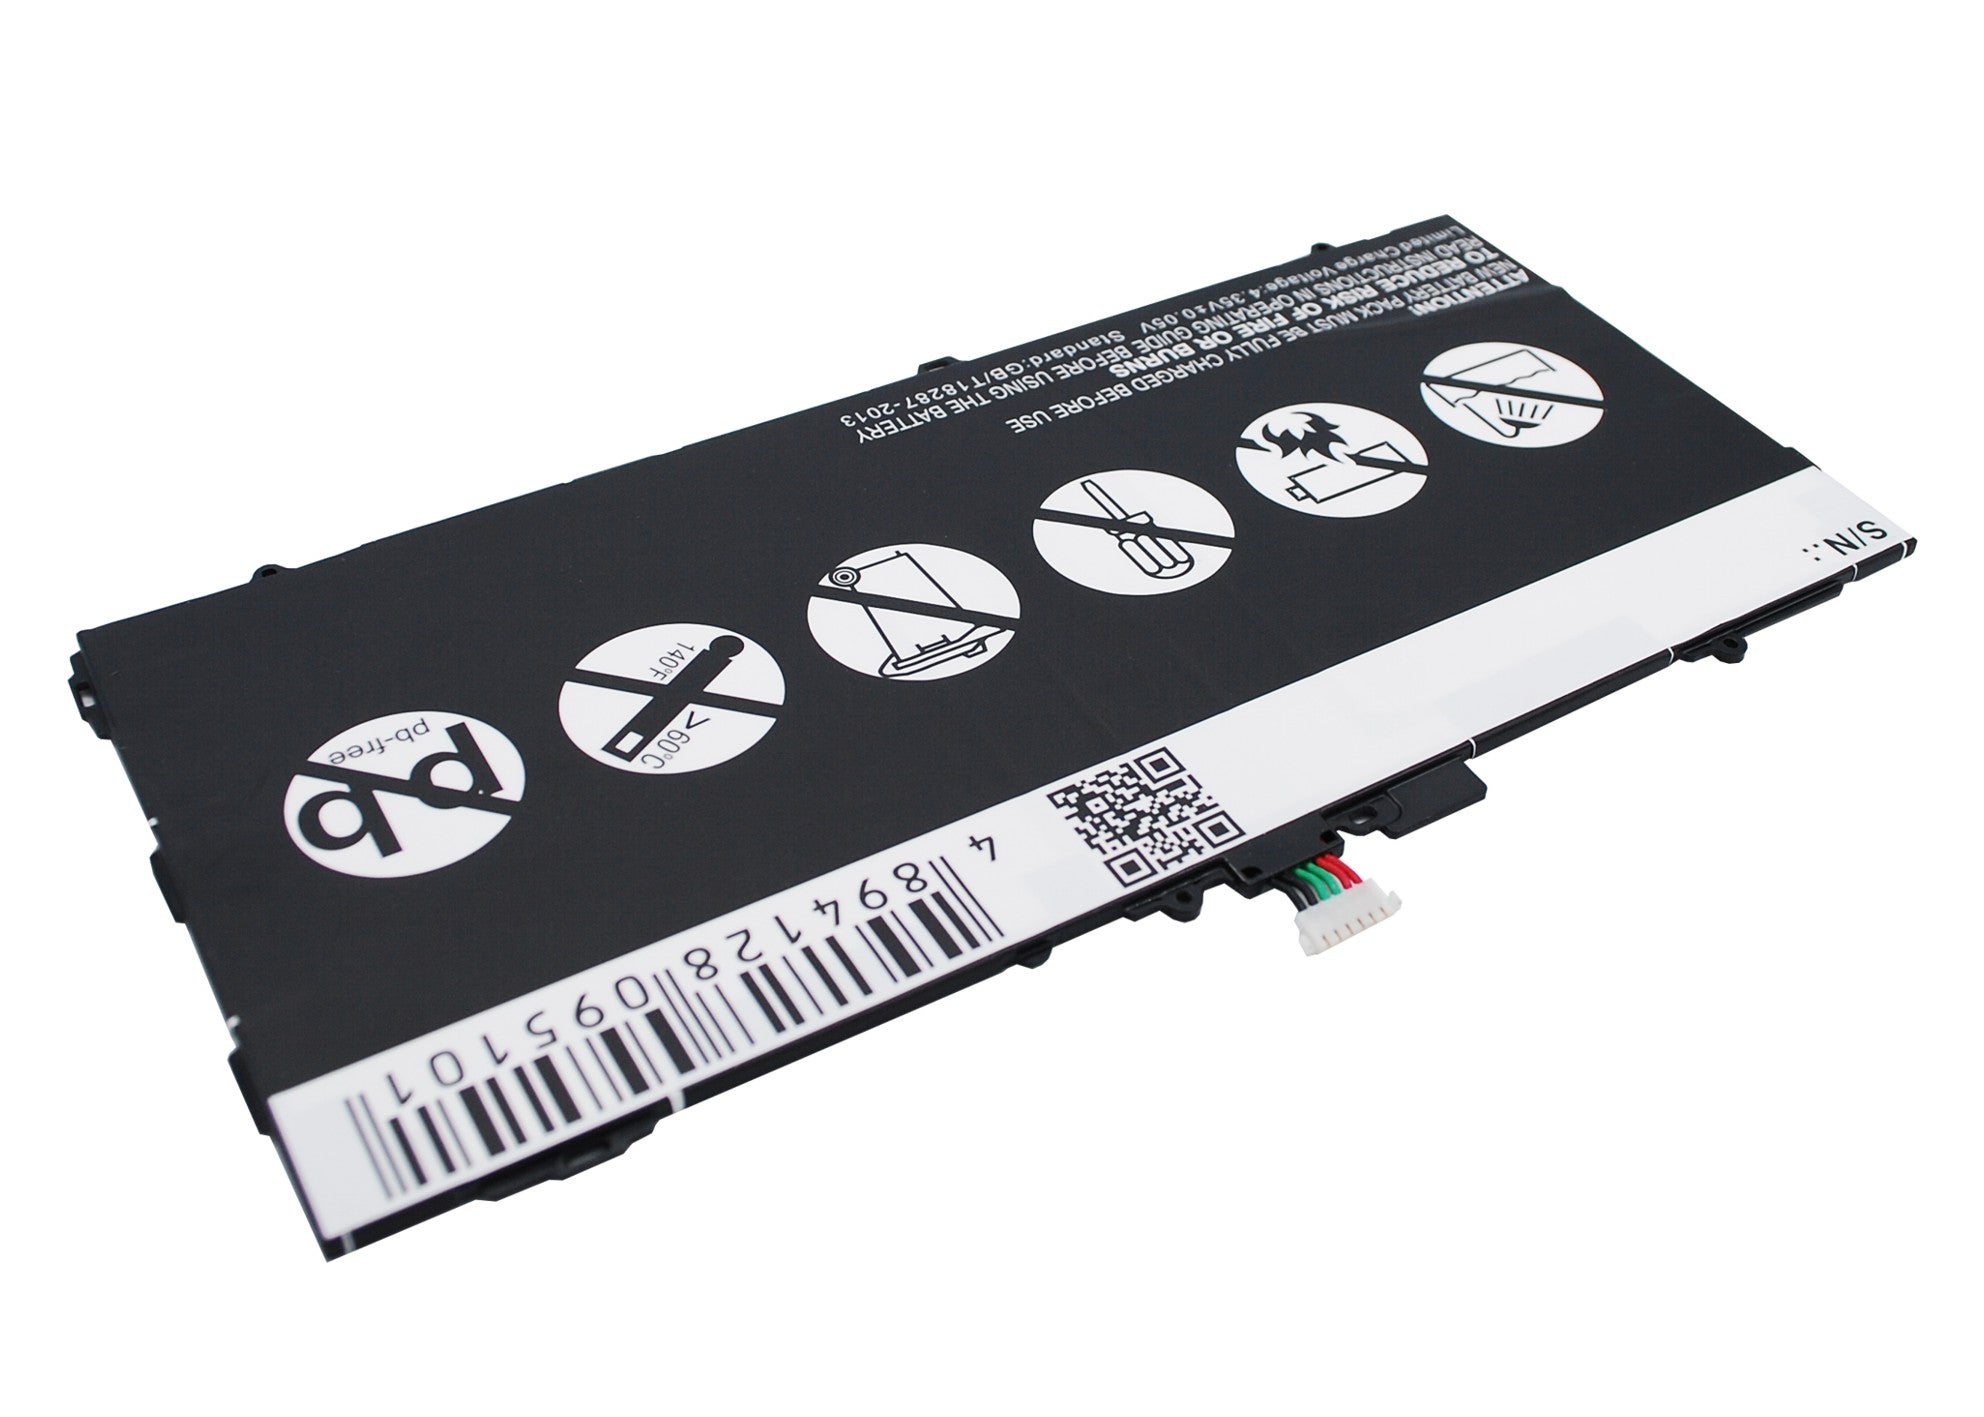 Samsung Galaxy Tab S 10.5 Replacement Battery